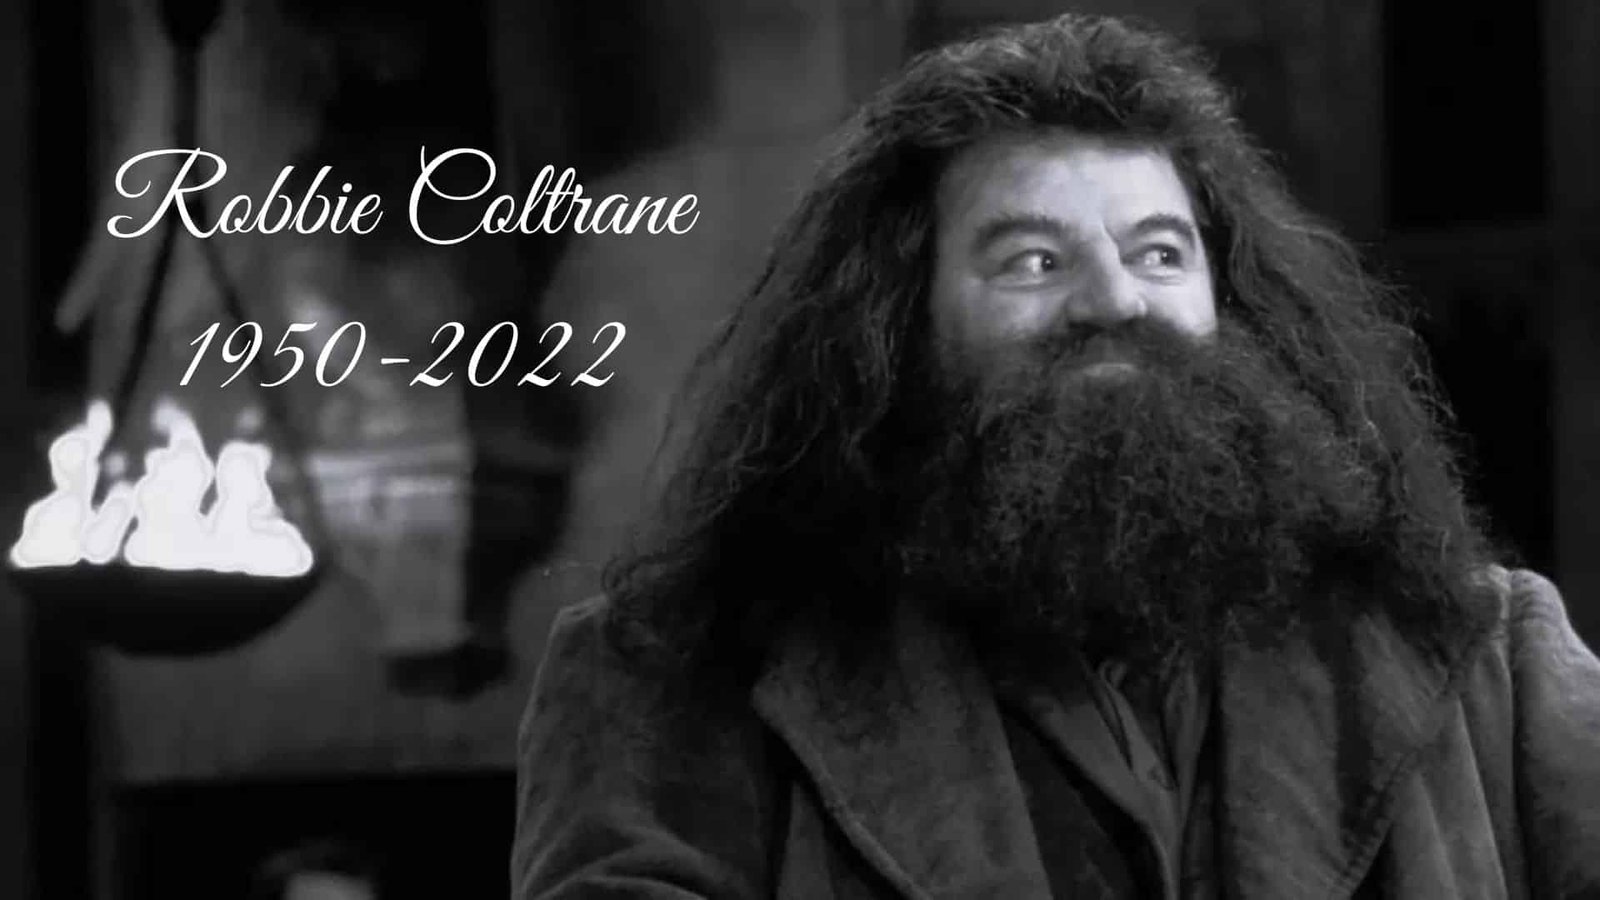 How old was Robbie Coltrane